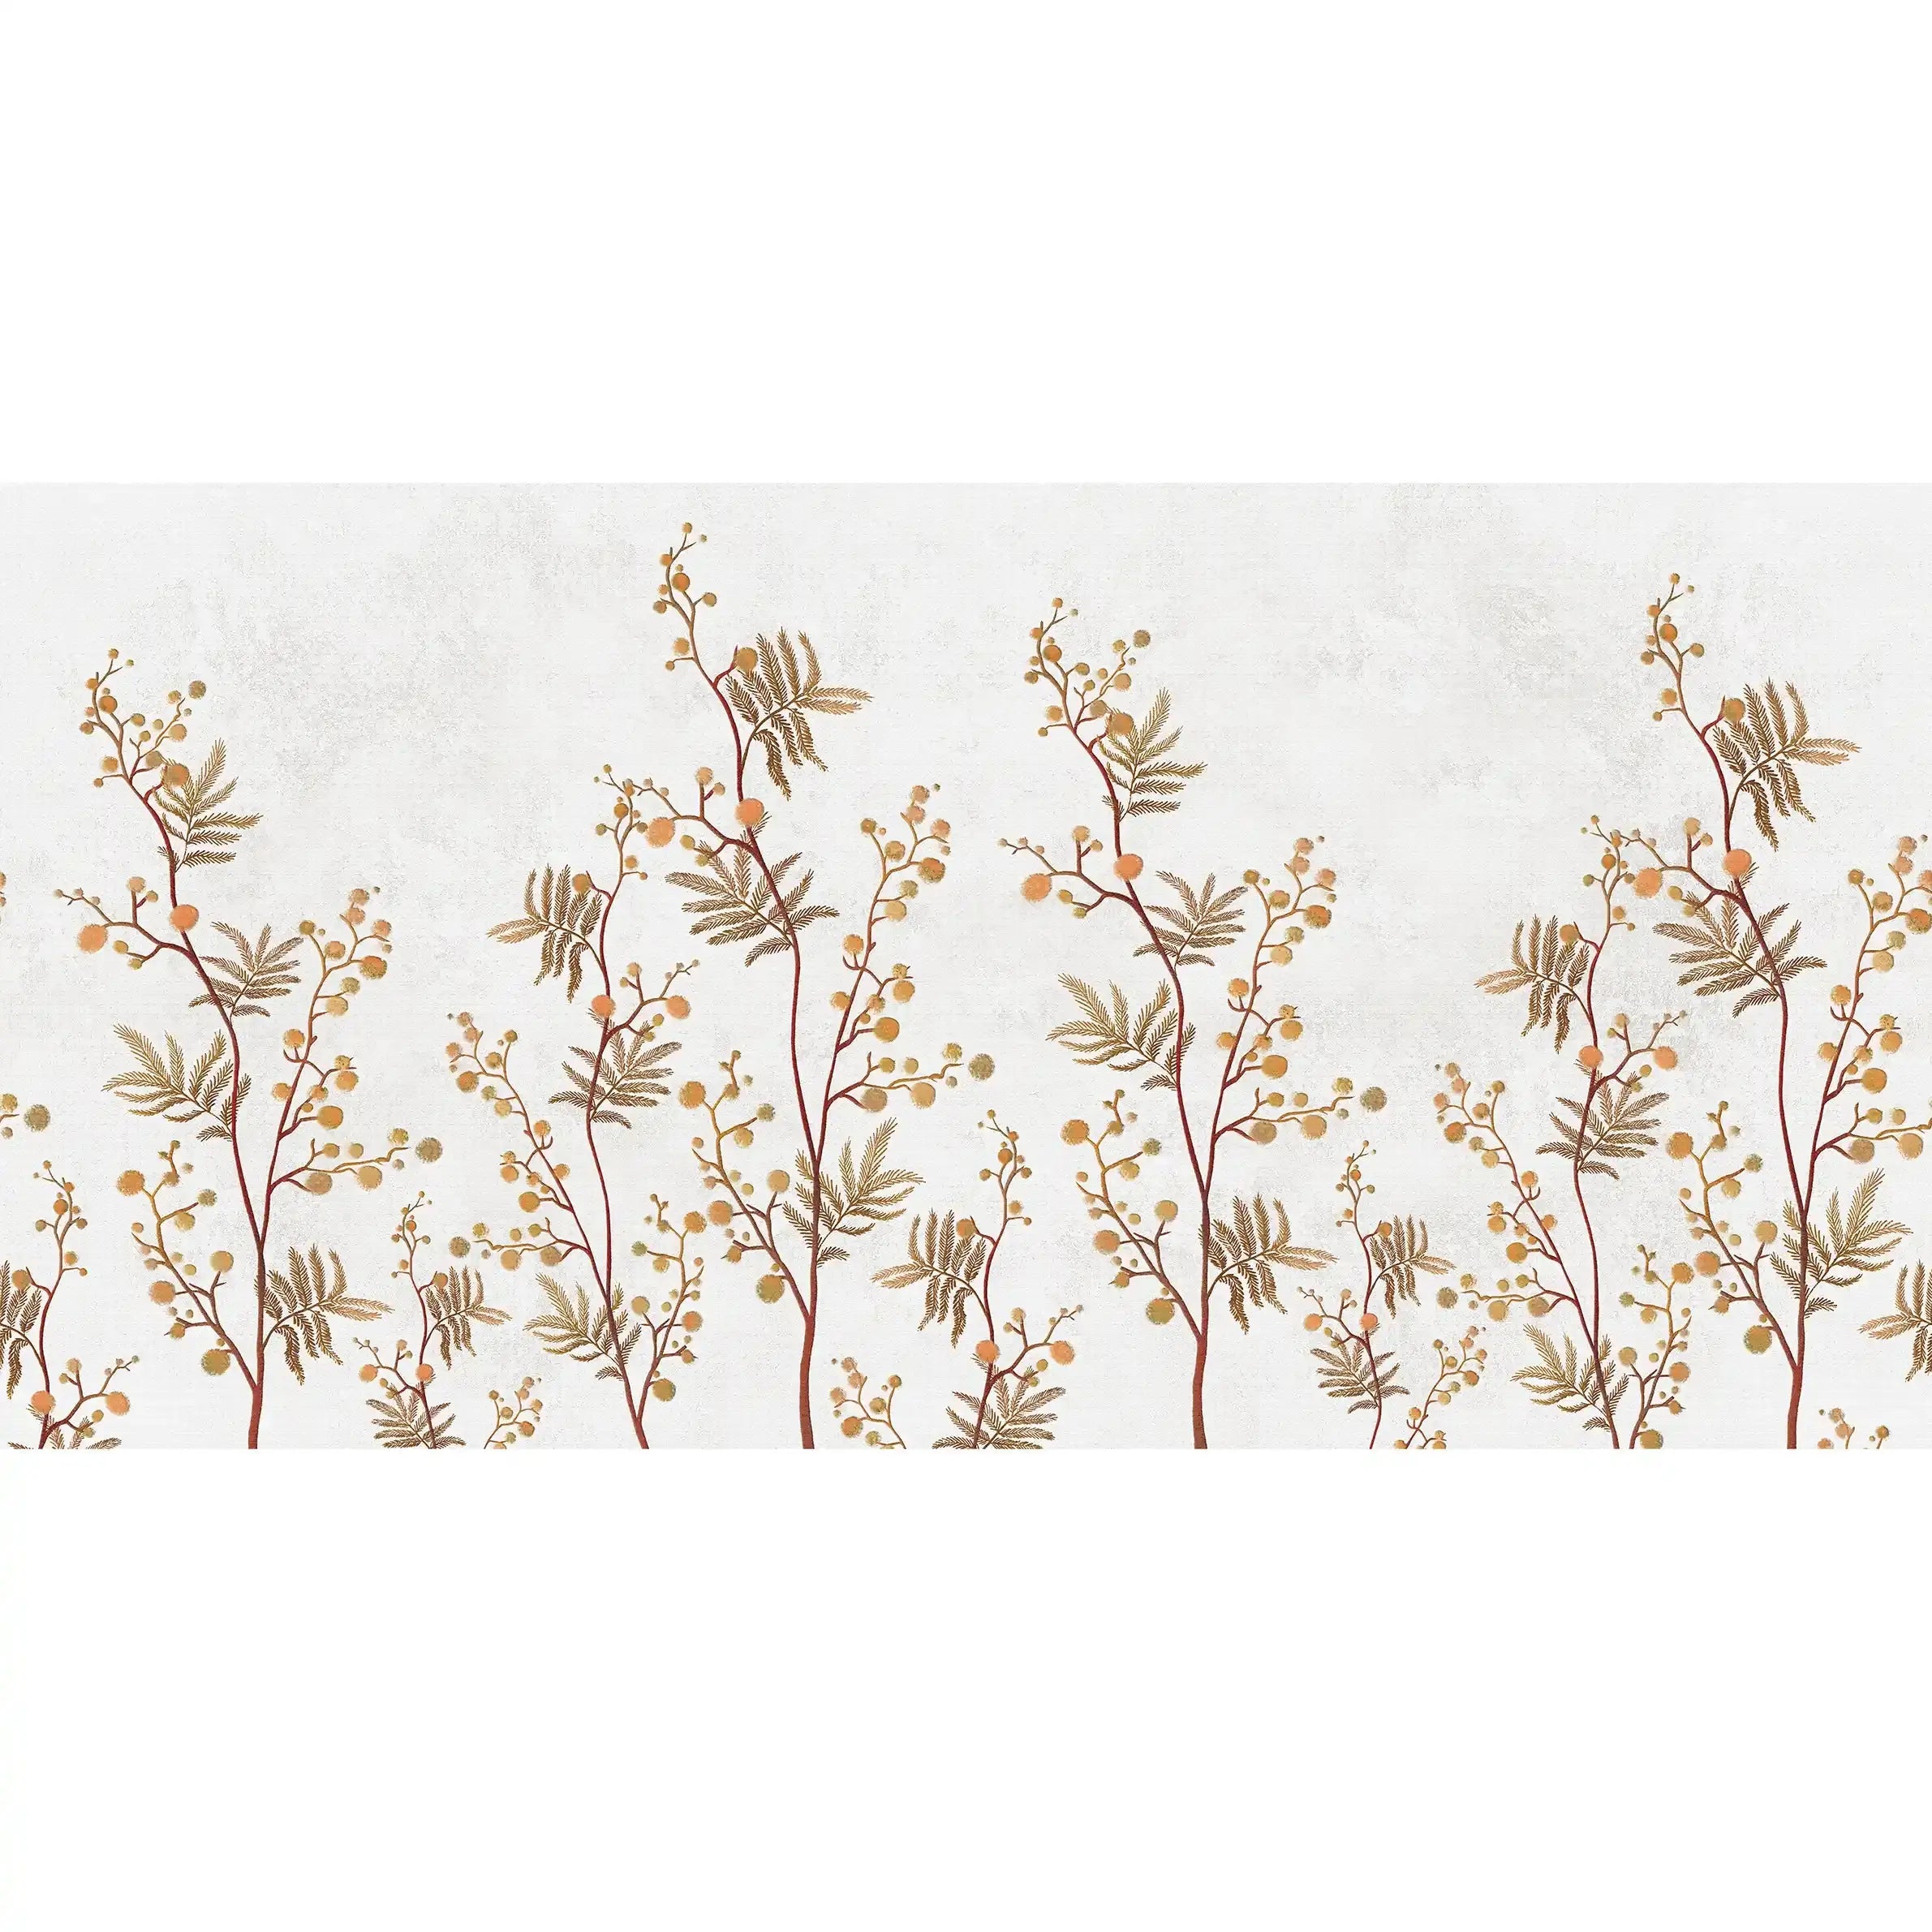 3016-B / Temporary Wallpaper: Floral Wall Mural with Easy Peel Off Design, Ideal for Accent Walls and Shelf Drawers - Artevella